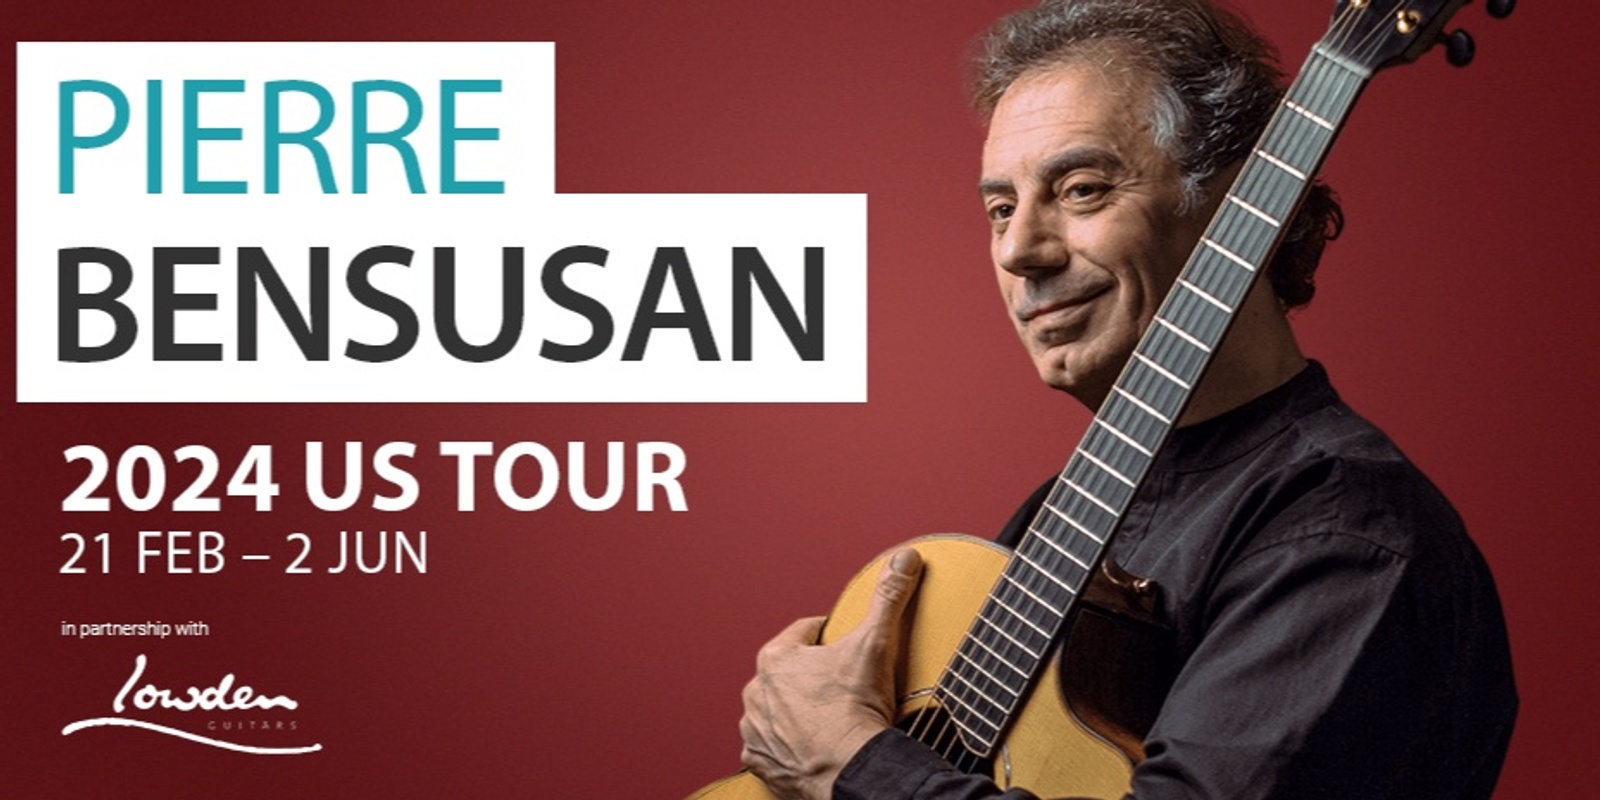 Banner image for Pierre Bensusan - Direct from France